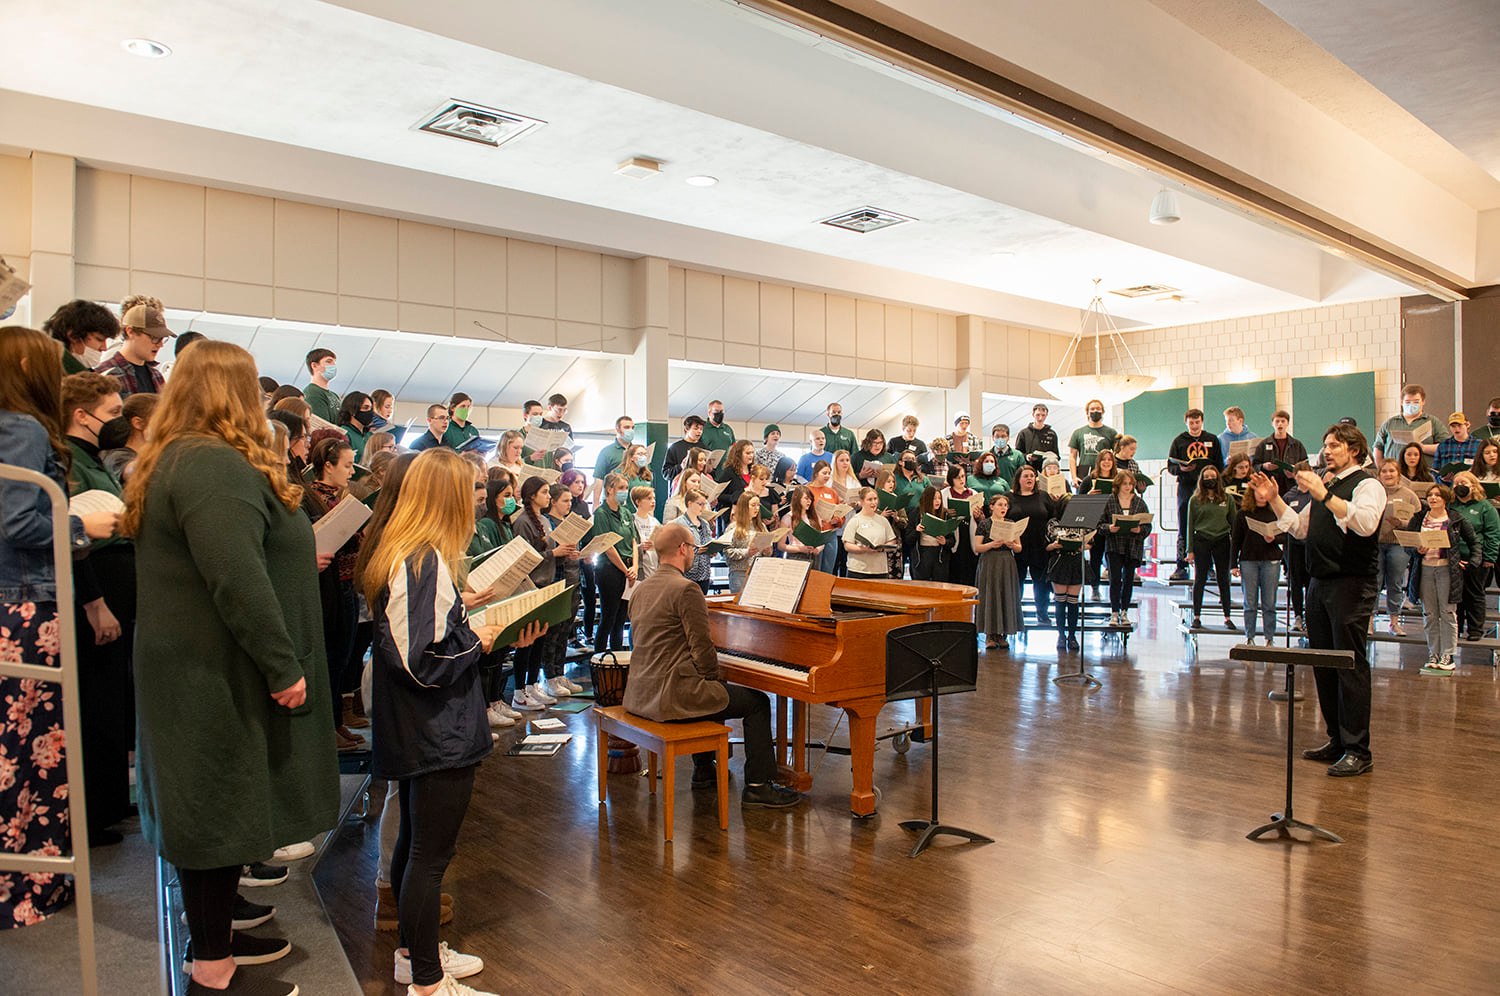 Bemidji State students led in choir and accompanied by a piano